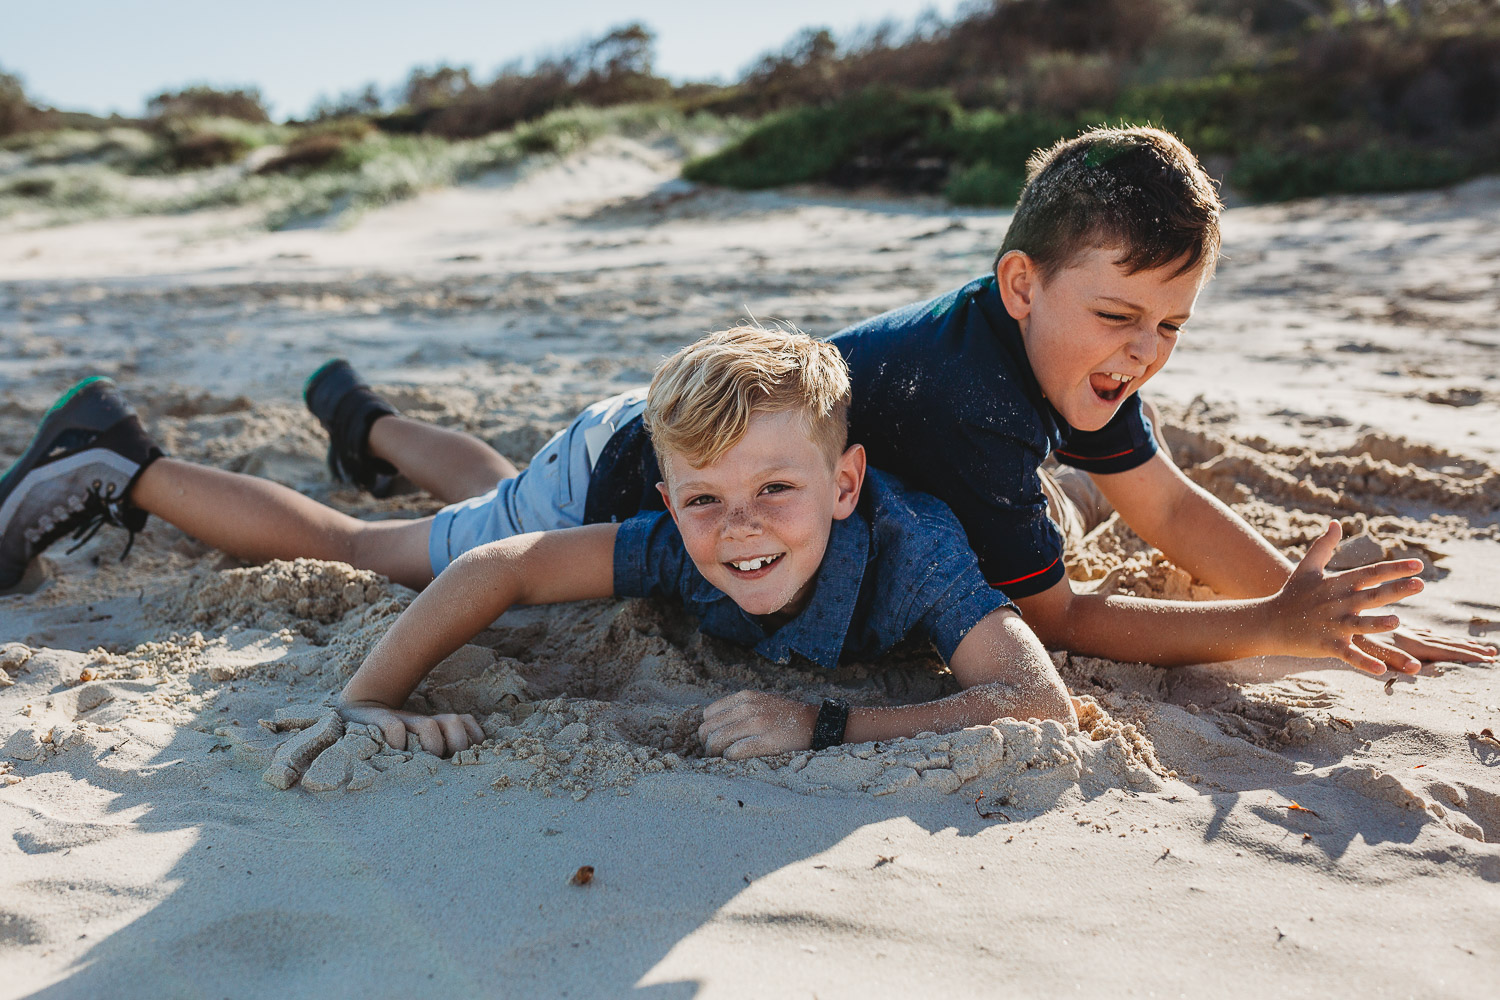 Boys smiling and laughing while wrestling at the beach